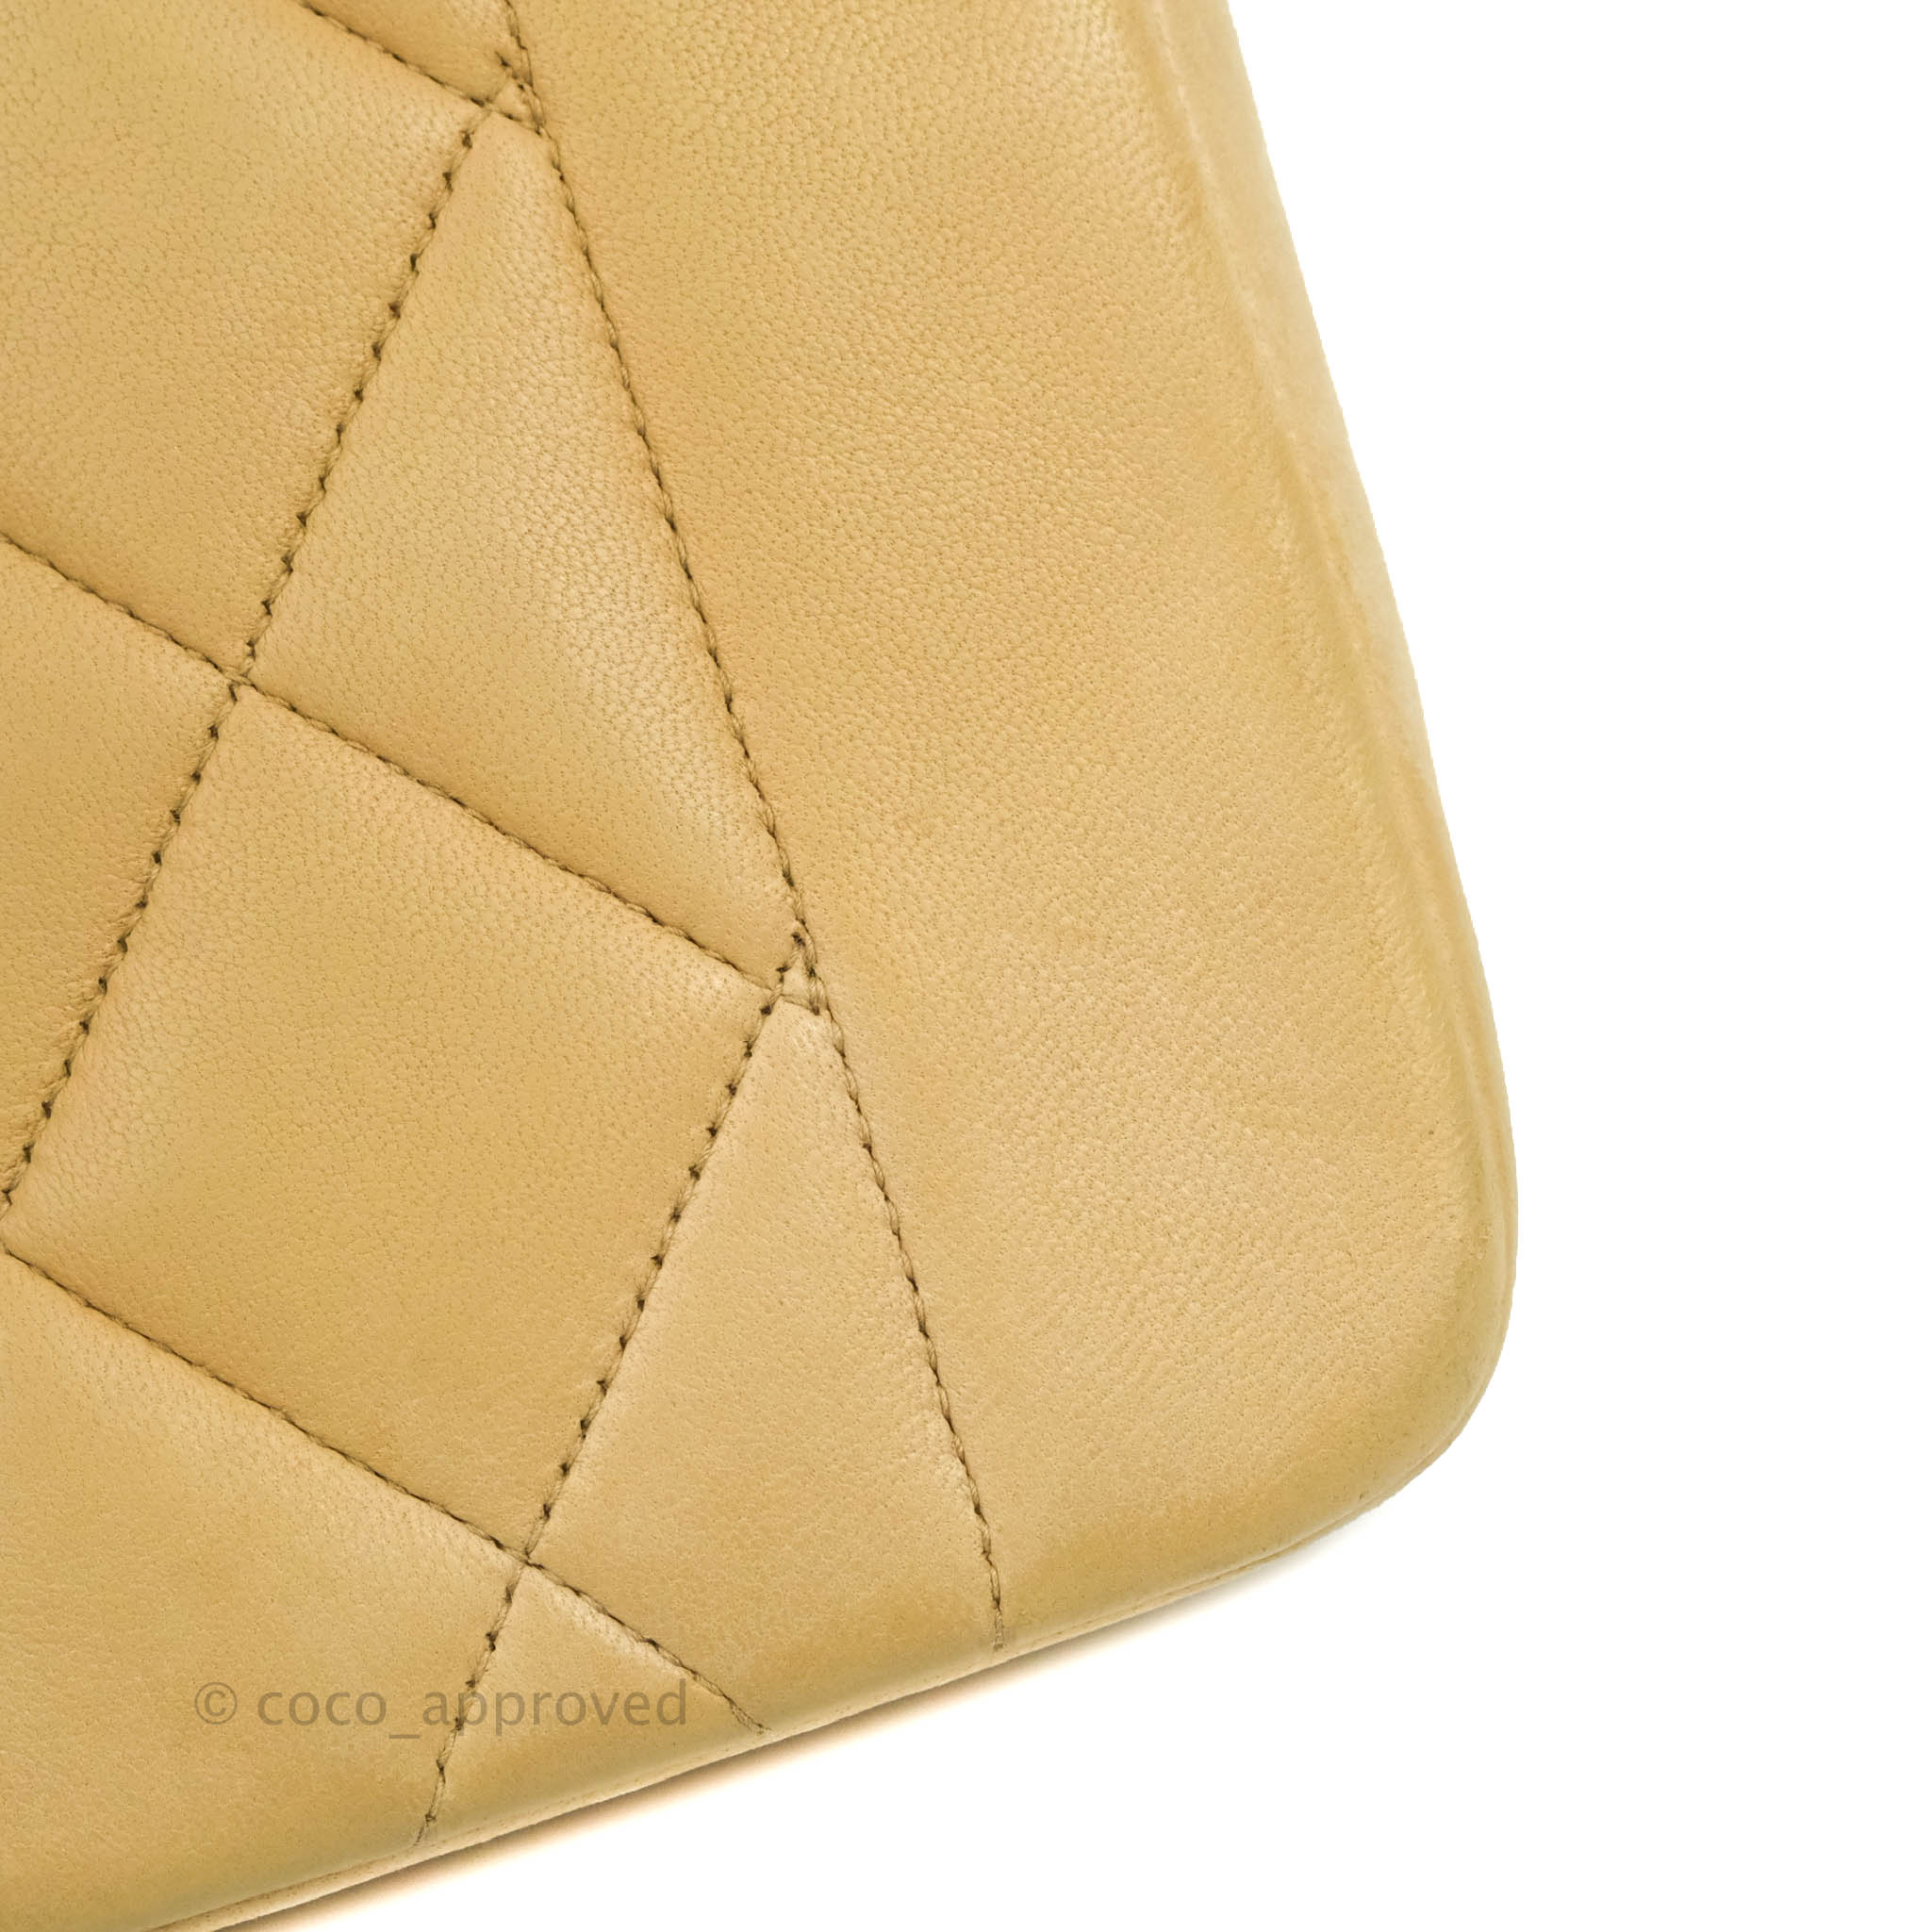 Chanel Vintage Beige Lambskin Small Diana Flap Bag – Classic Coco Authentic  Vintage Luxury